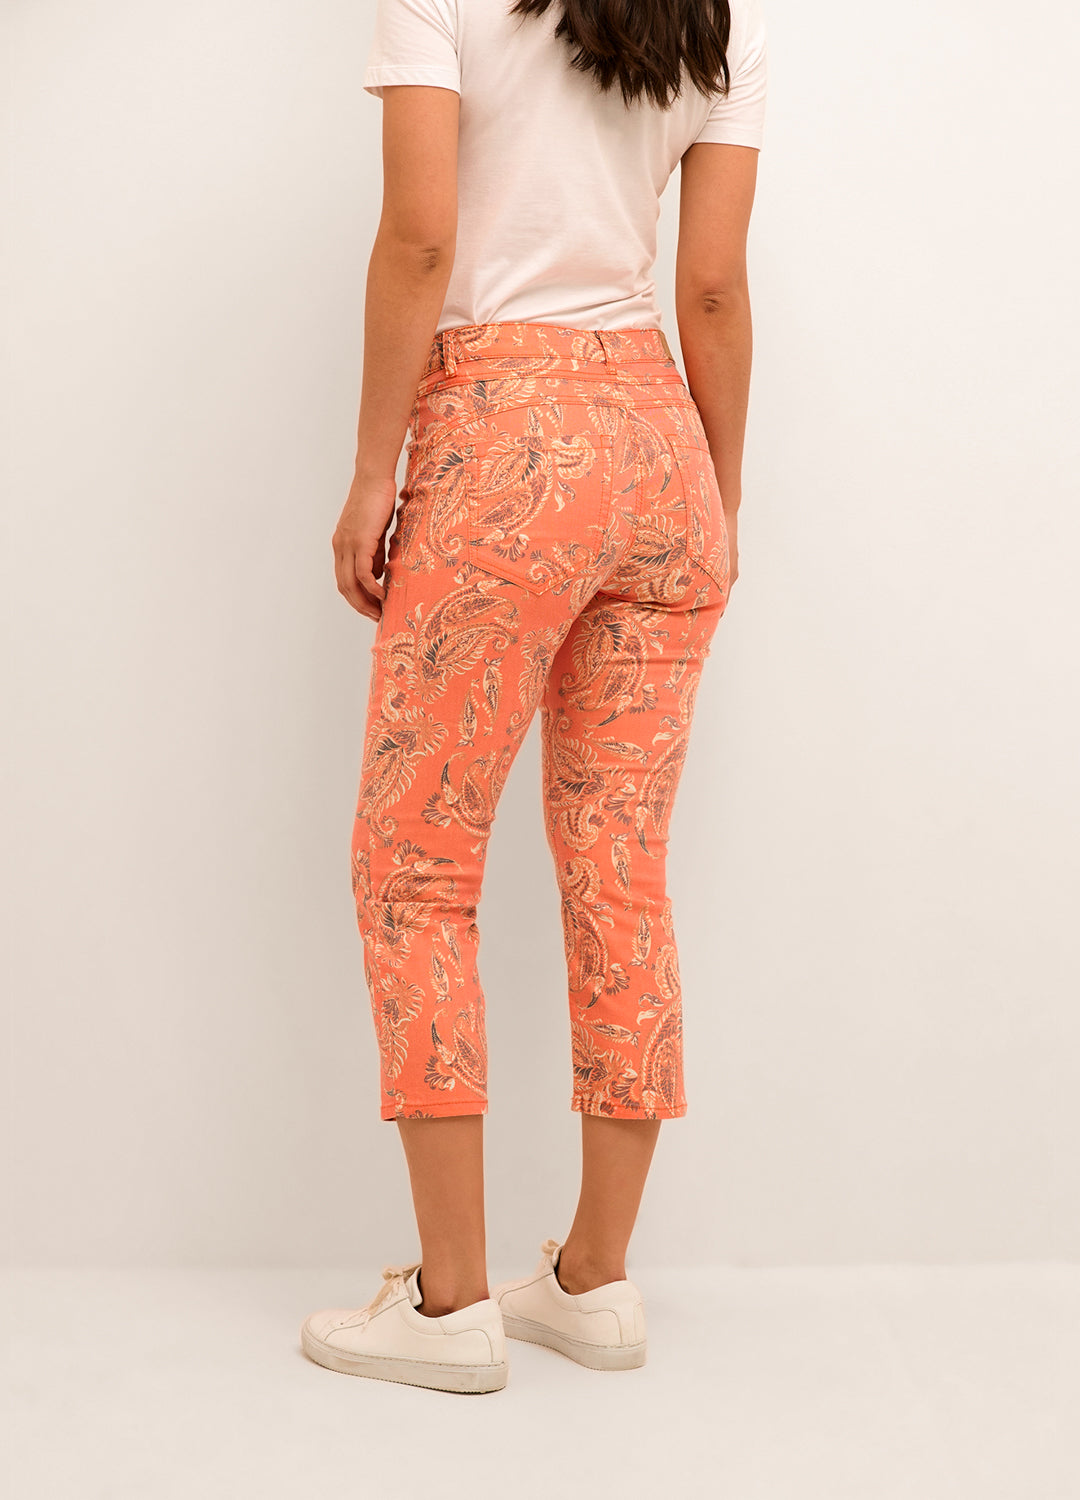 Back view of the Cream Clothing Denmark Kaiza 3/4 Printed Twill Jeans in Exotic Orange Paisley pattern at Inner Beach Co, Toronto, Ontario, Canada